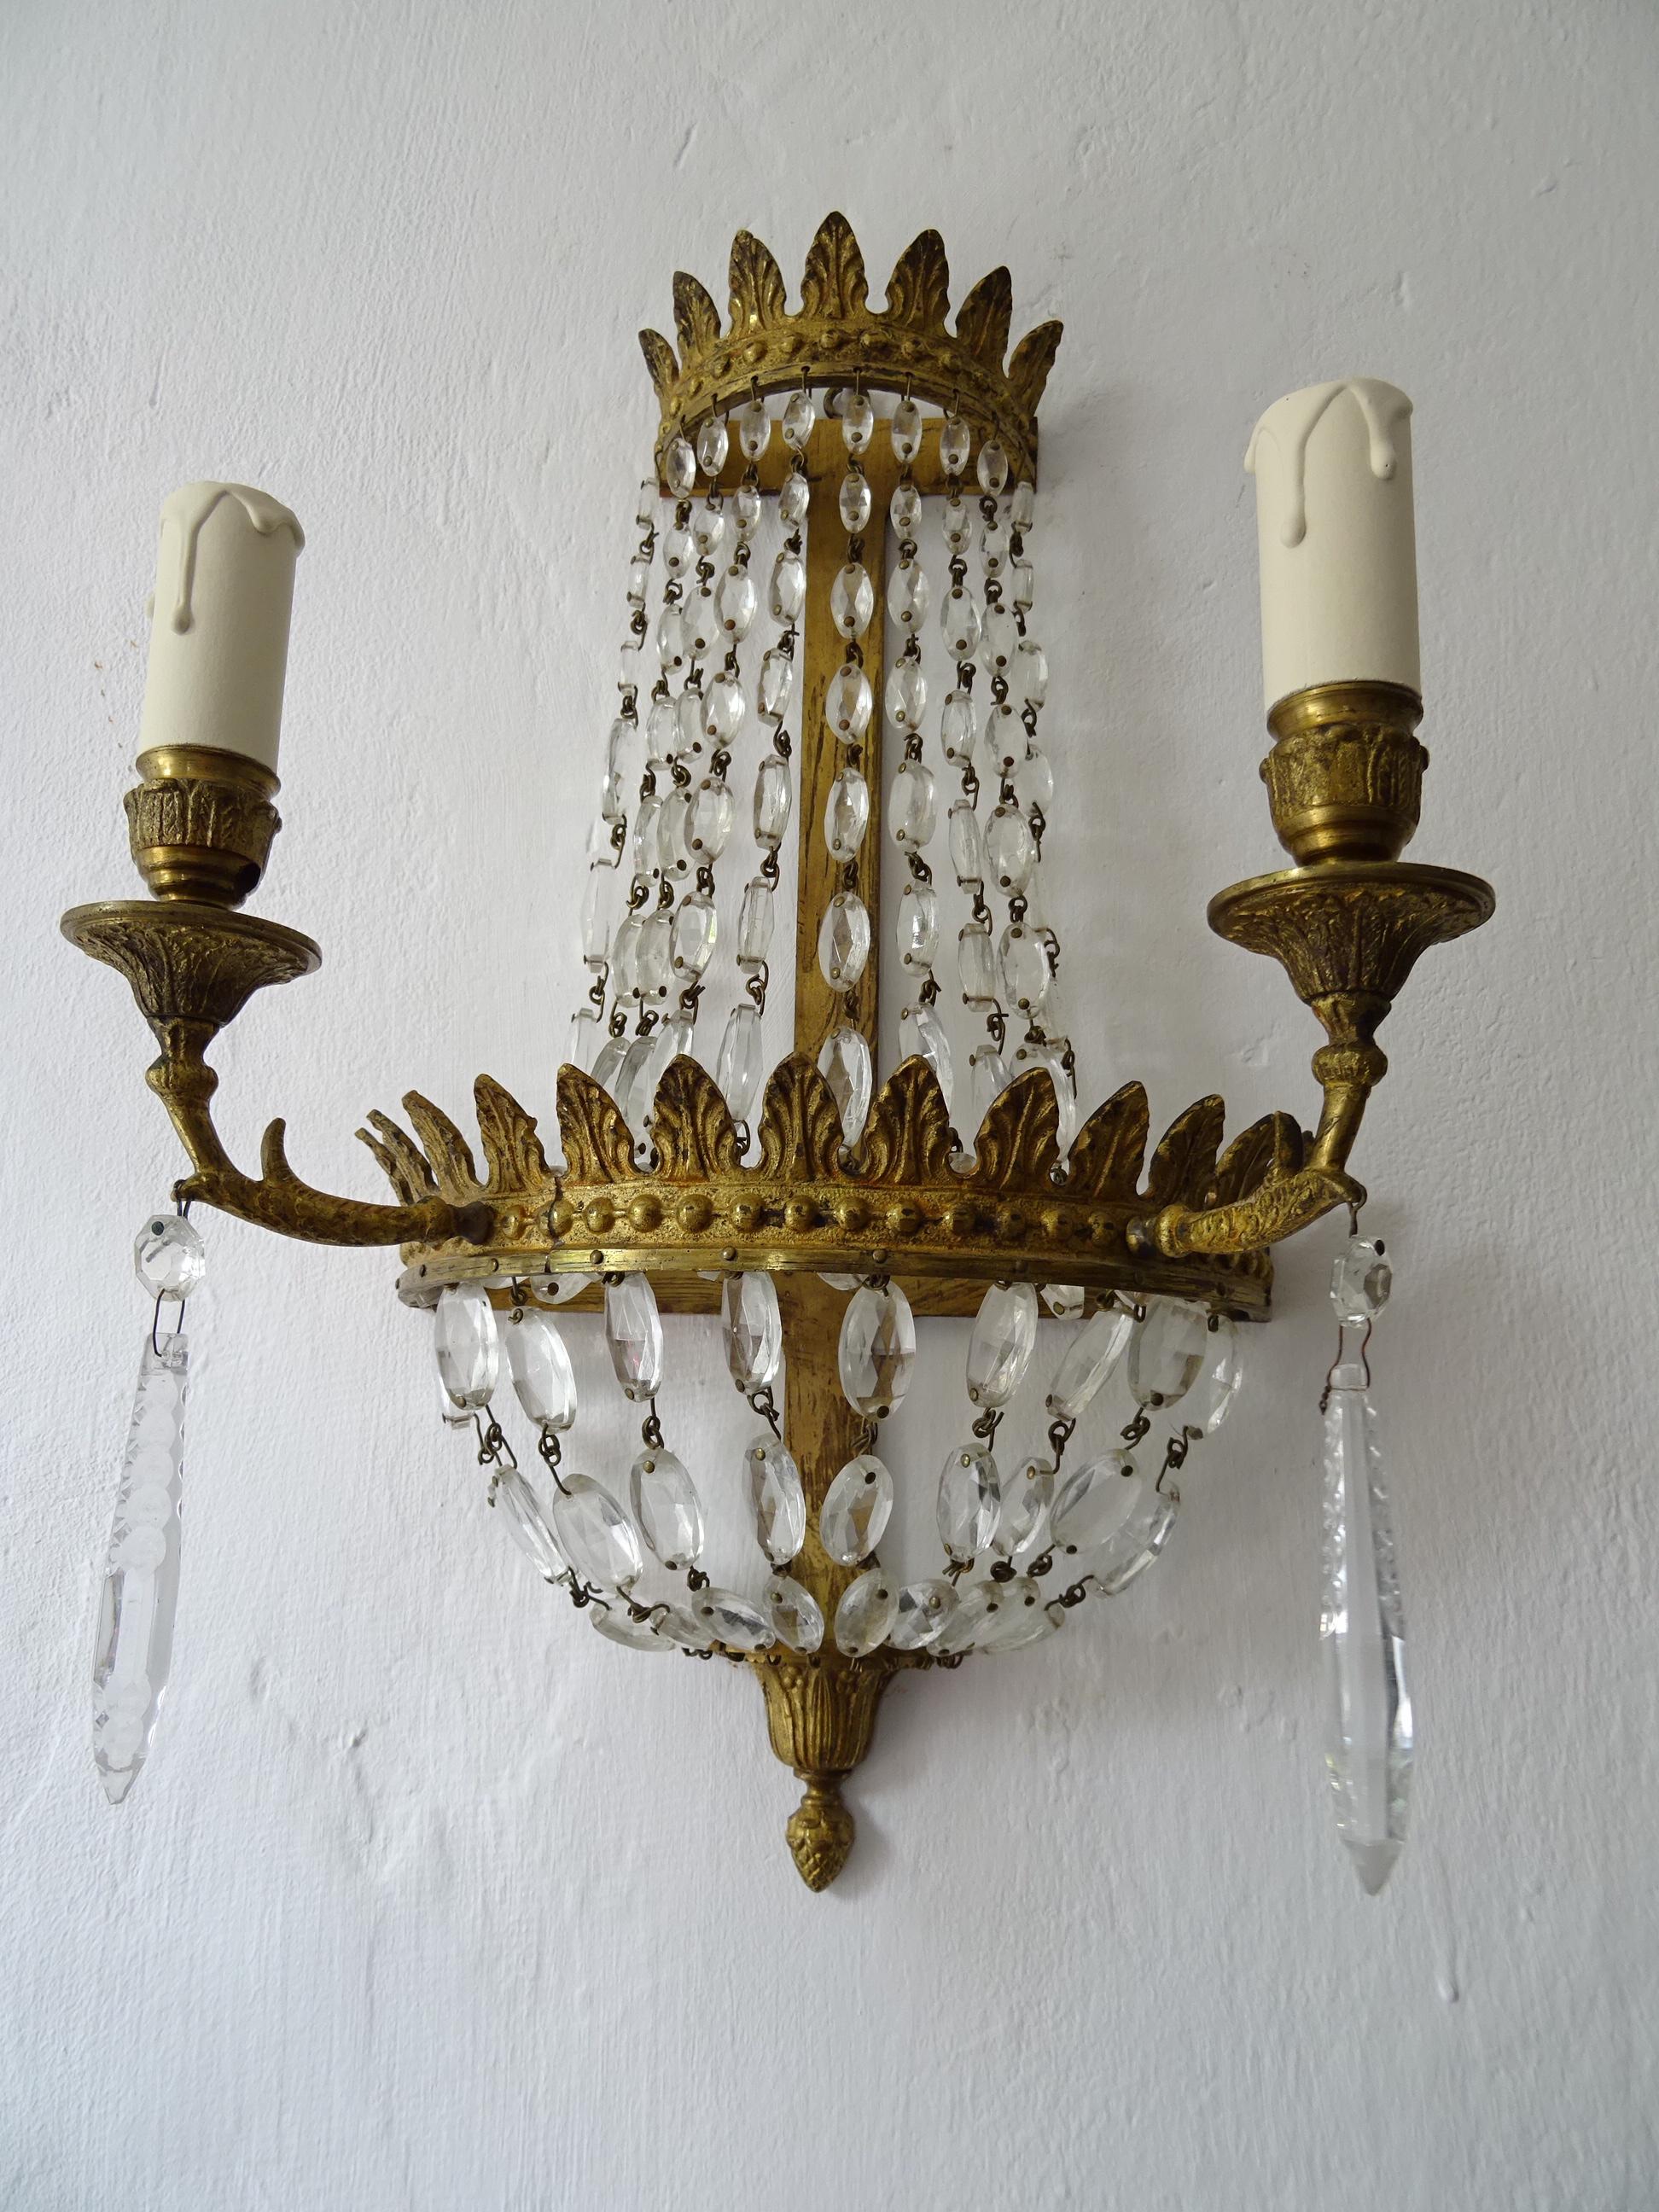  French Crystal Rare Oval Prisms Bronze Empire Sconces, circa 1850 For Sale 3